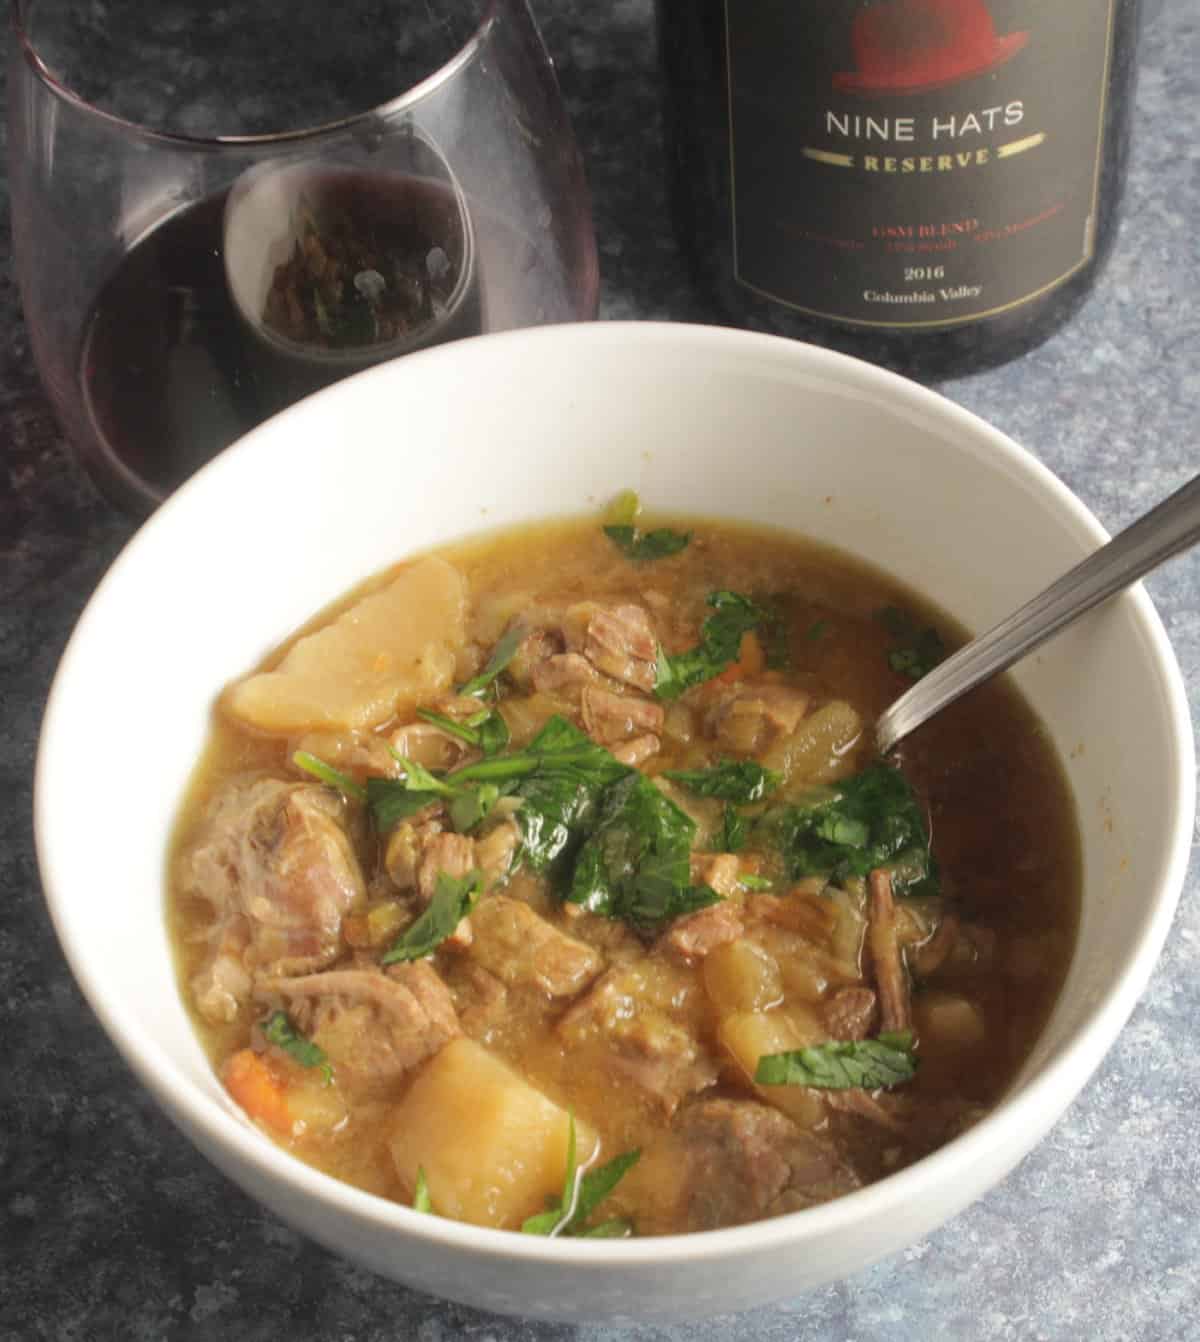 Irish Lamb Stew served in a white bowl along with a red wine.